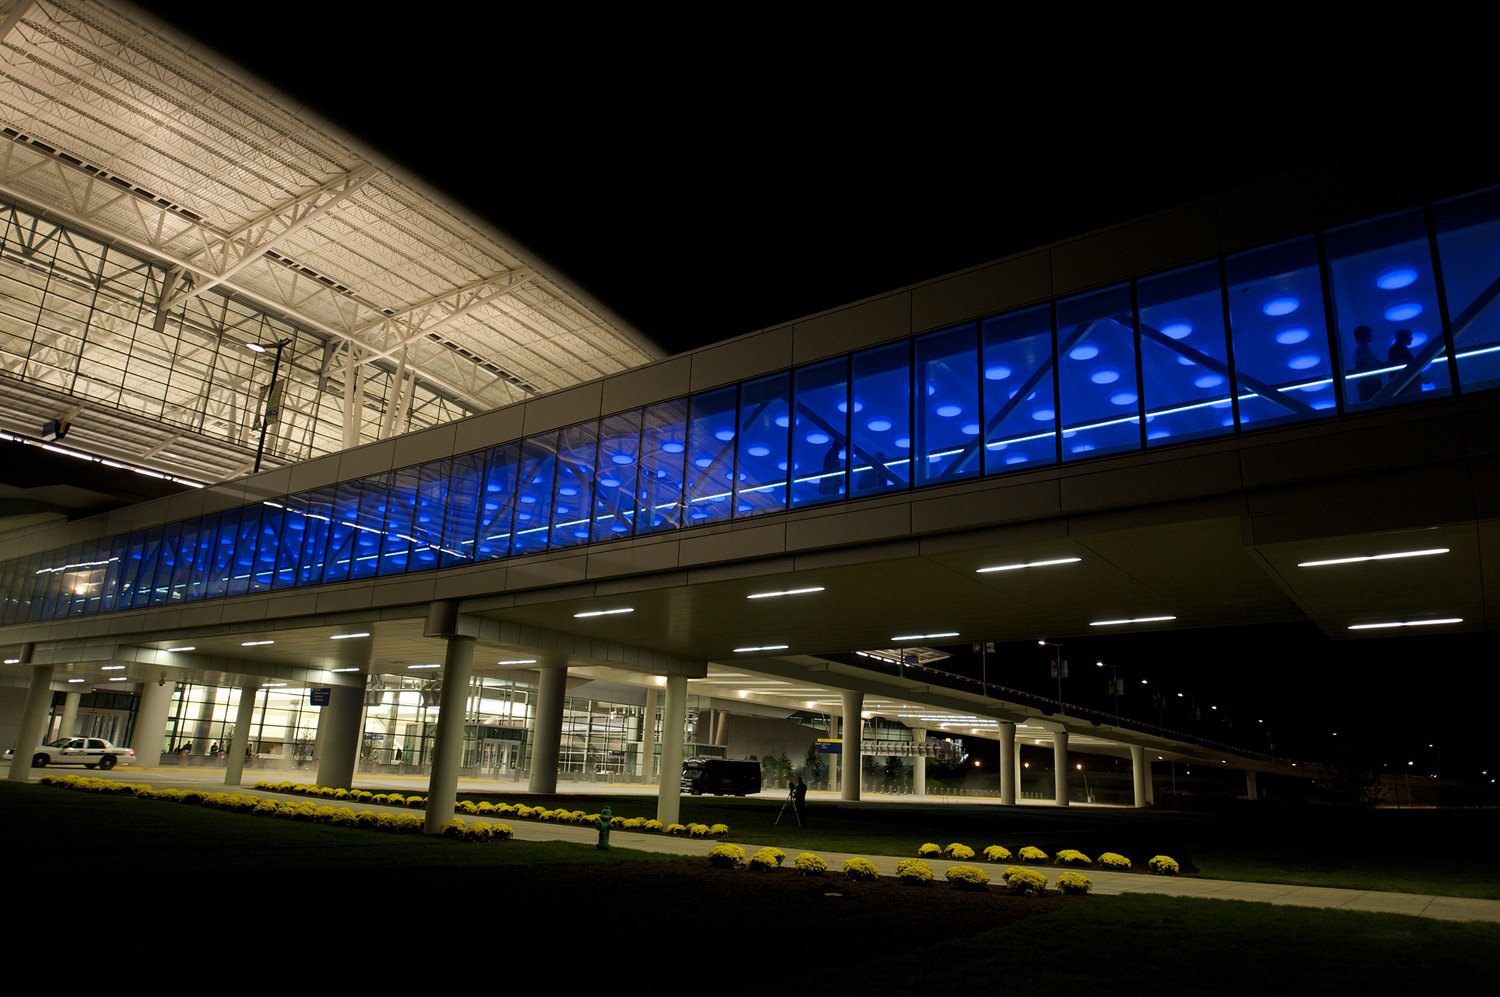 Outside photo of blue LED lights at Indianapolis airport